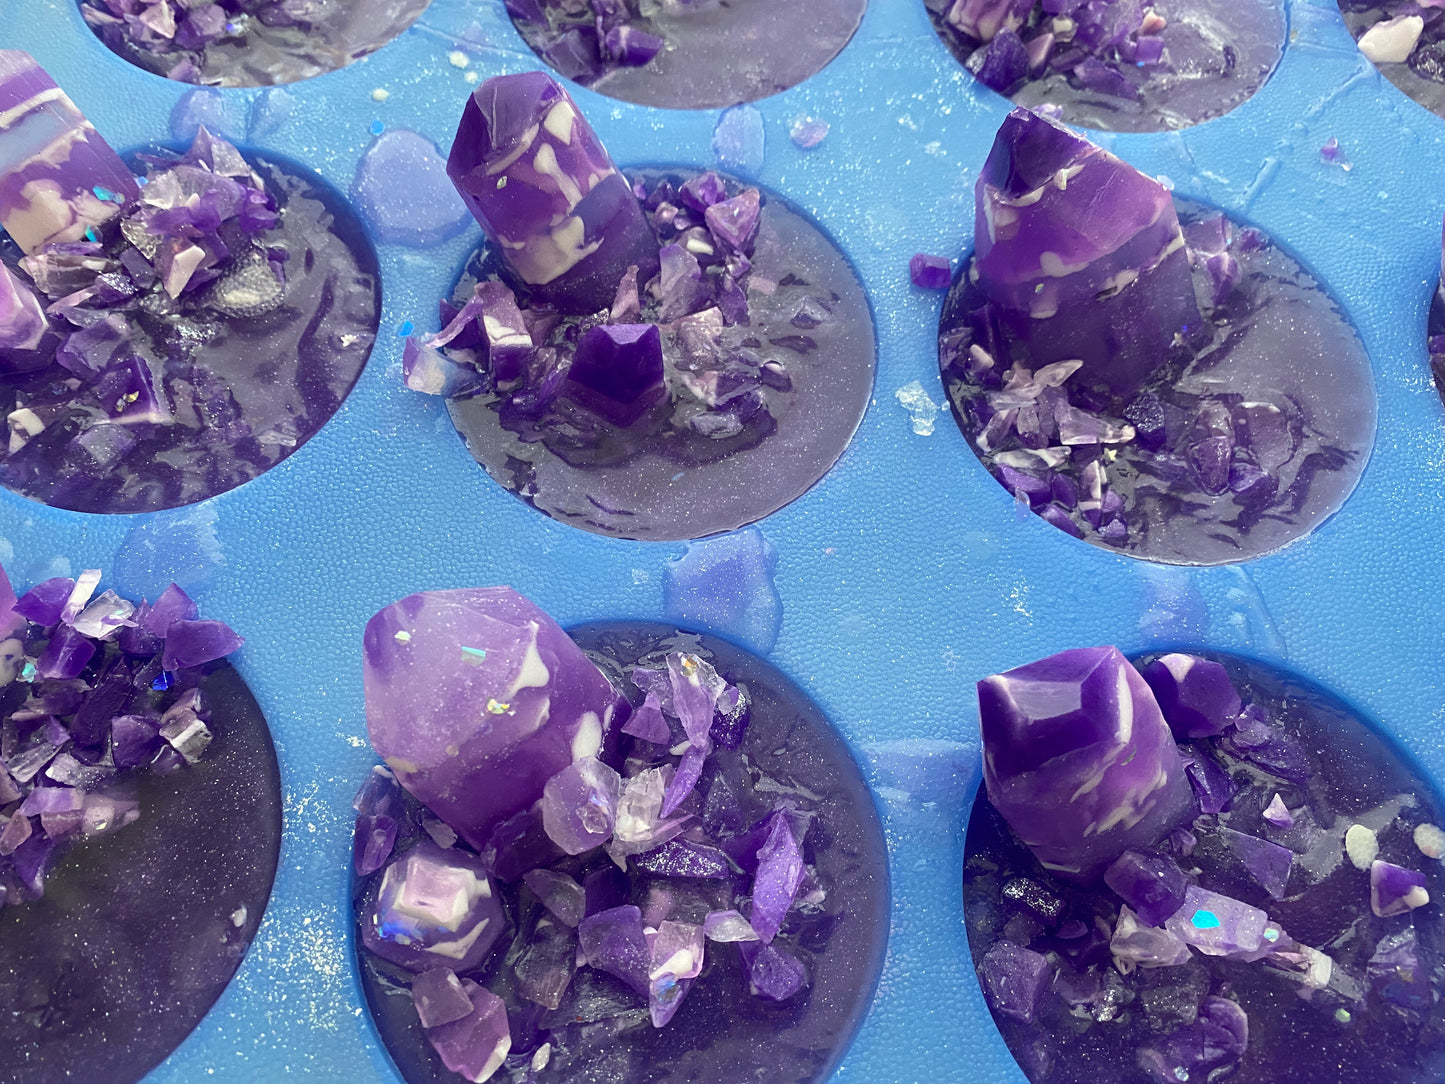 soap bars made to look like amethyst crystals in the mold